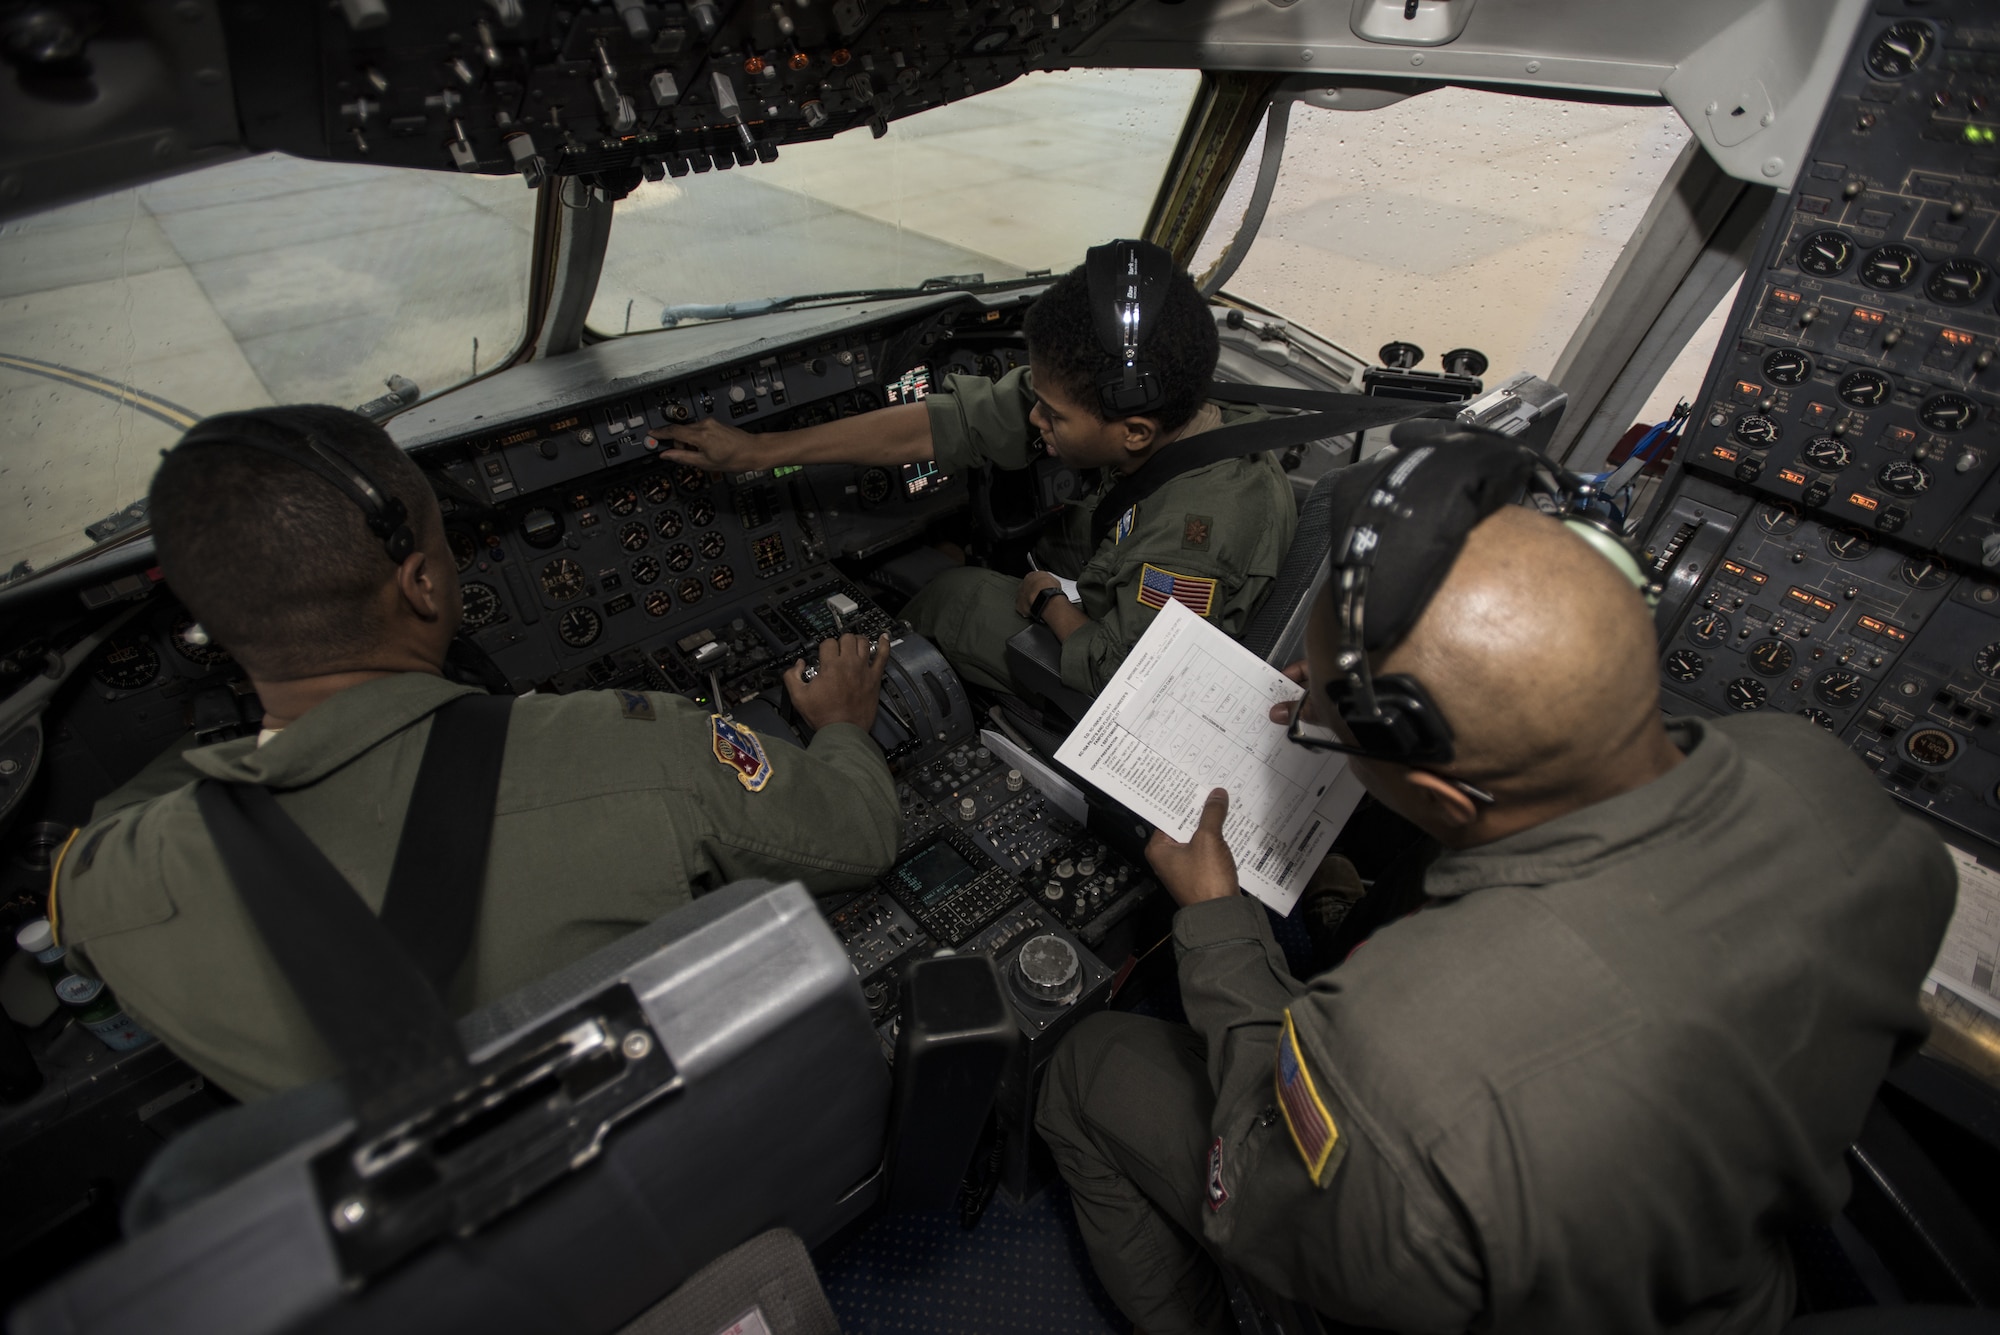 U.S. Air Force Col. Adrian Byers, 514th Air Mobility Wing vice commander, U.S. Air Force Maj. Lynn Grady, 305th Air Mobility Wing command executive, and Senior Master Sgt. Brian Pettaway, 2nd Air Refueling Squadron flight engineer, conduct flight control pre-checks before a Black History Month heritage air-refueling flight on Joint Base McGuire-Dix-Lakehurst, New Jersey, Feb. 13, 2020. Byers believes when military installations are able to put heritage flights together, it brings a sense of pride and remembrance of the legacy they came from. (U.S. Air Force photo by Senior Airman Ariel Owings)